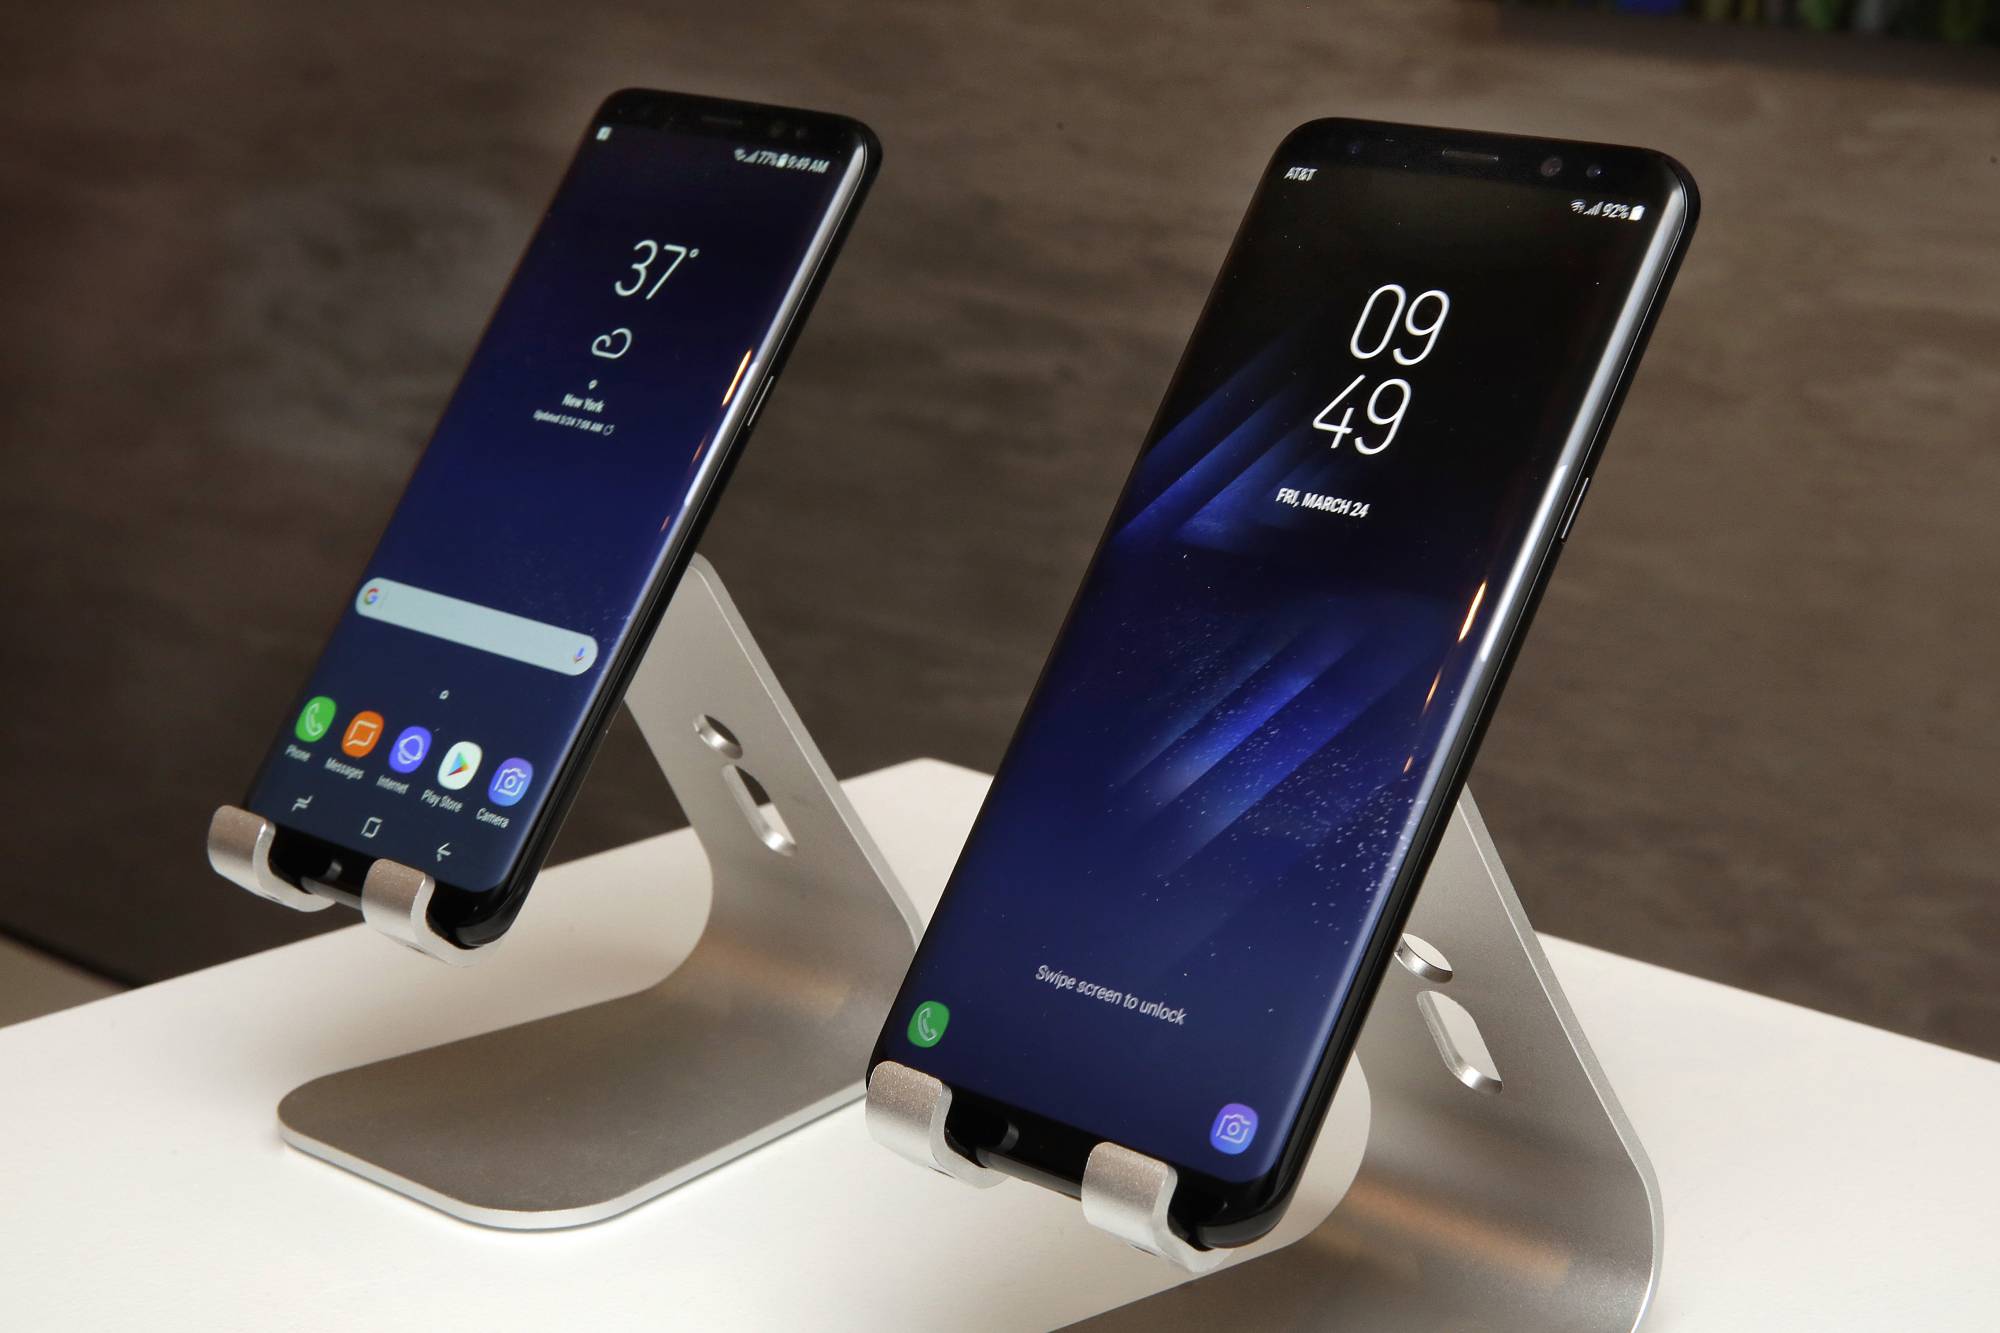 Samsung’s Galaxy S8 phone aims to dispel the Note 7 debacle